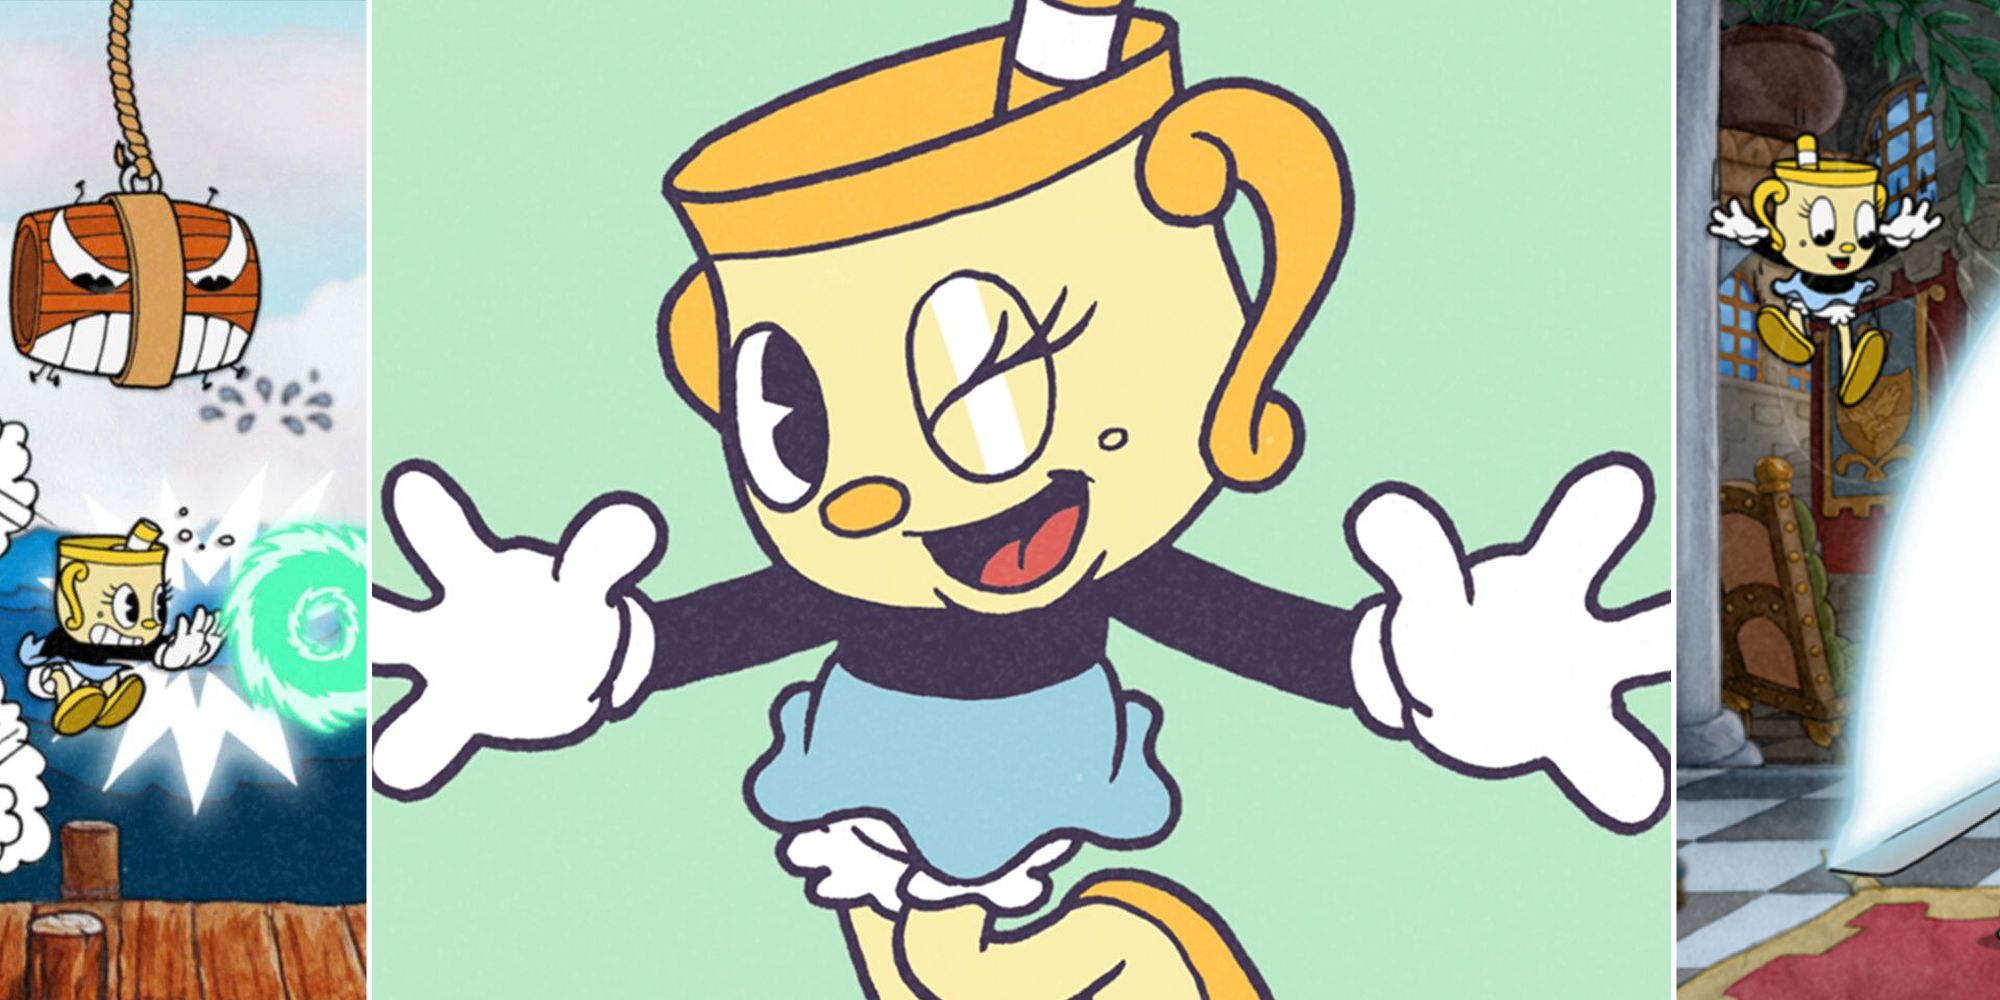 Cuphead Ms Chalice's personality, playstyle, and more